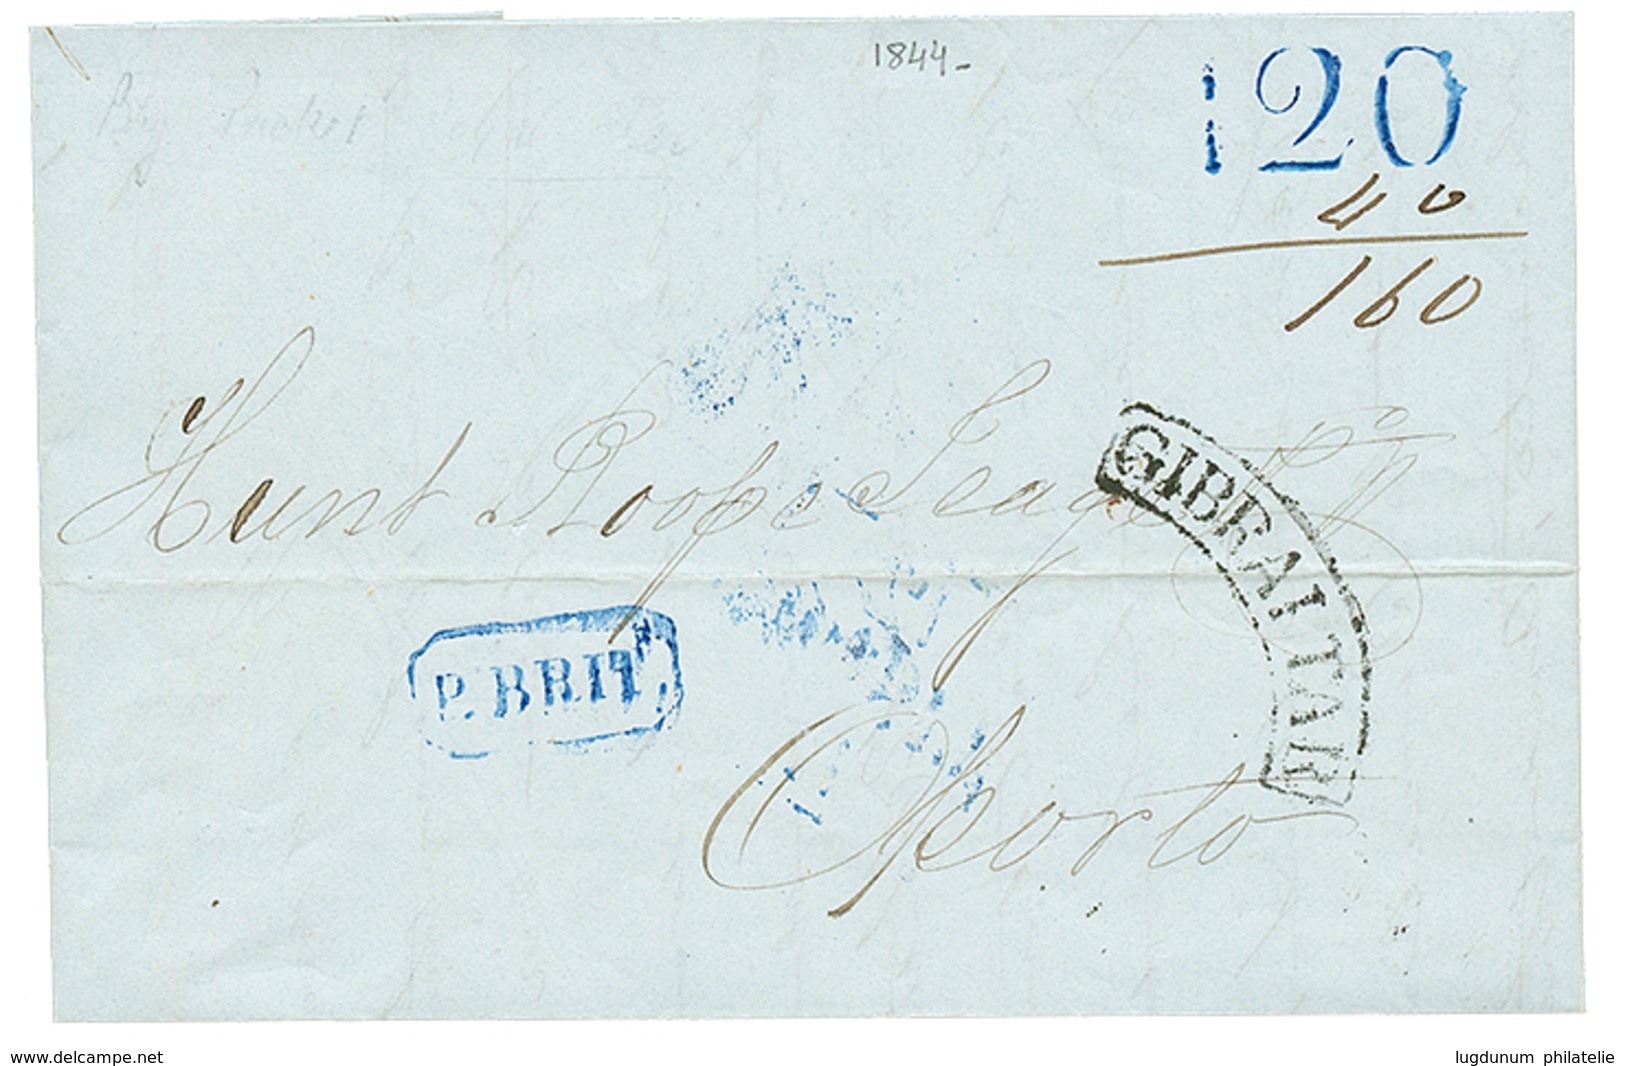 1844 GIBRALTAR + Boxed P.BRIT + "120+ 40 = 160" Tax Marking On Entire Letter To PORTUGAL. Superb. - Gibraltar